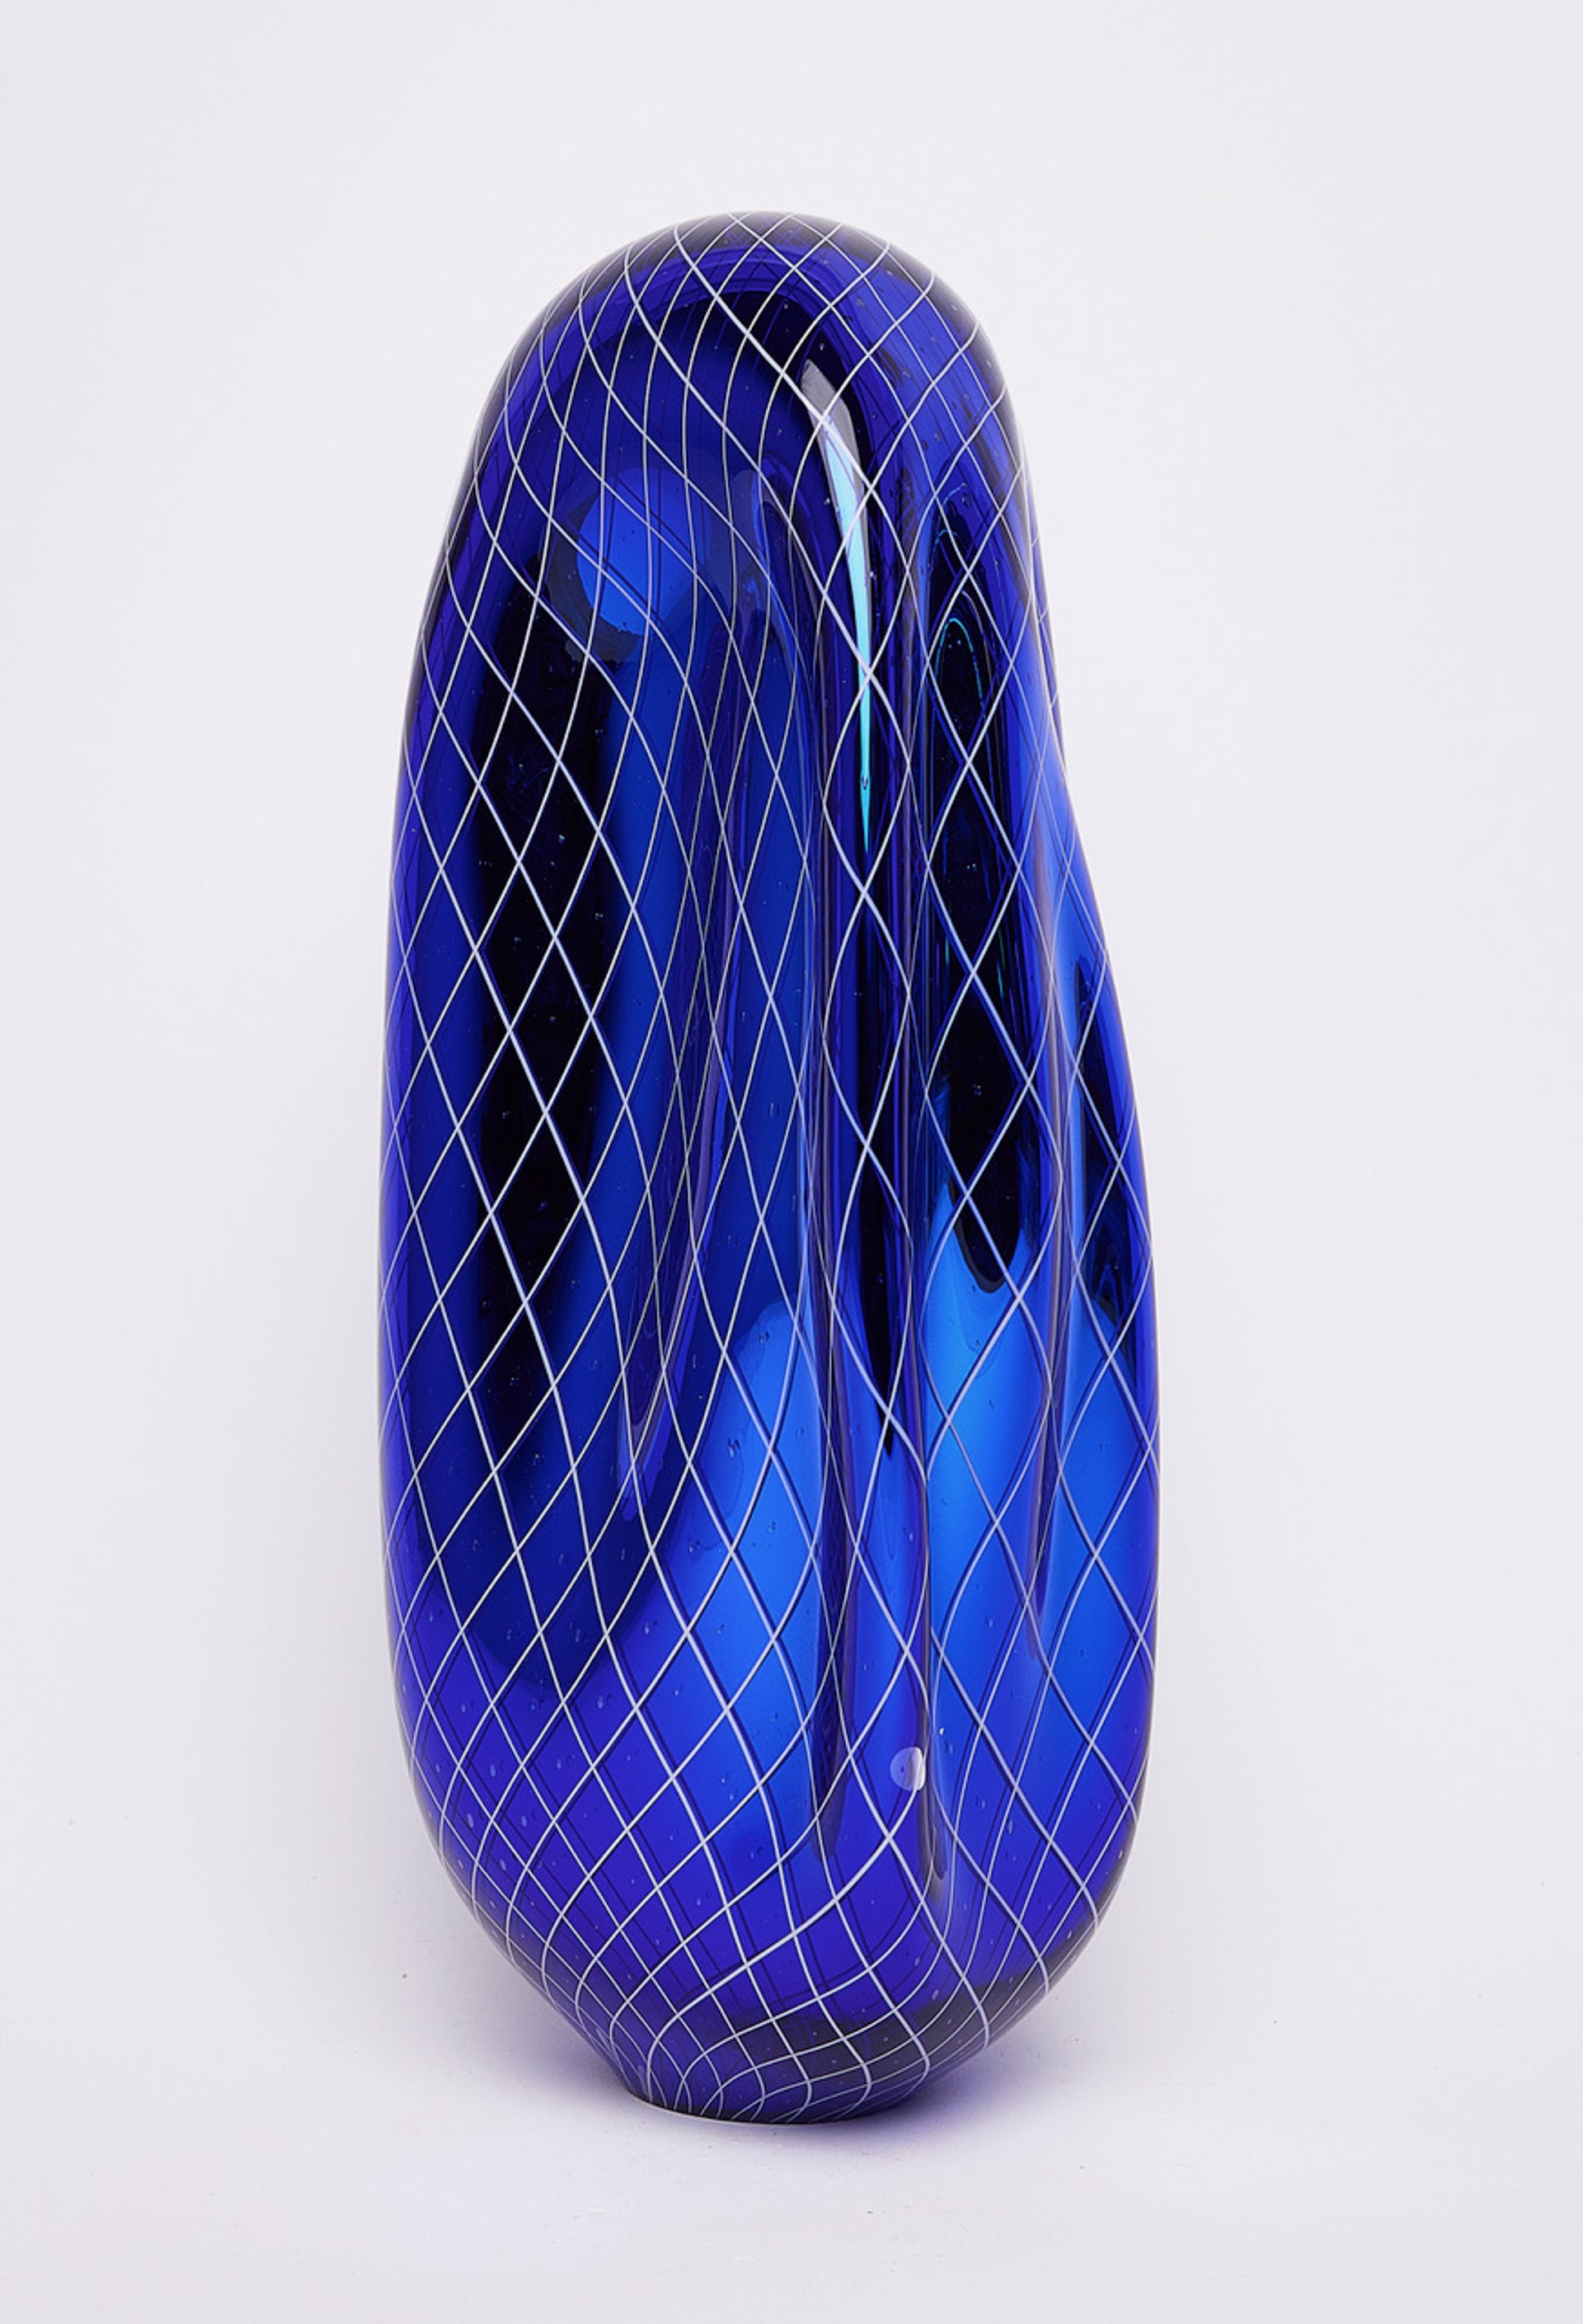 Blue Mirrored Form by Simon Waranch